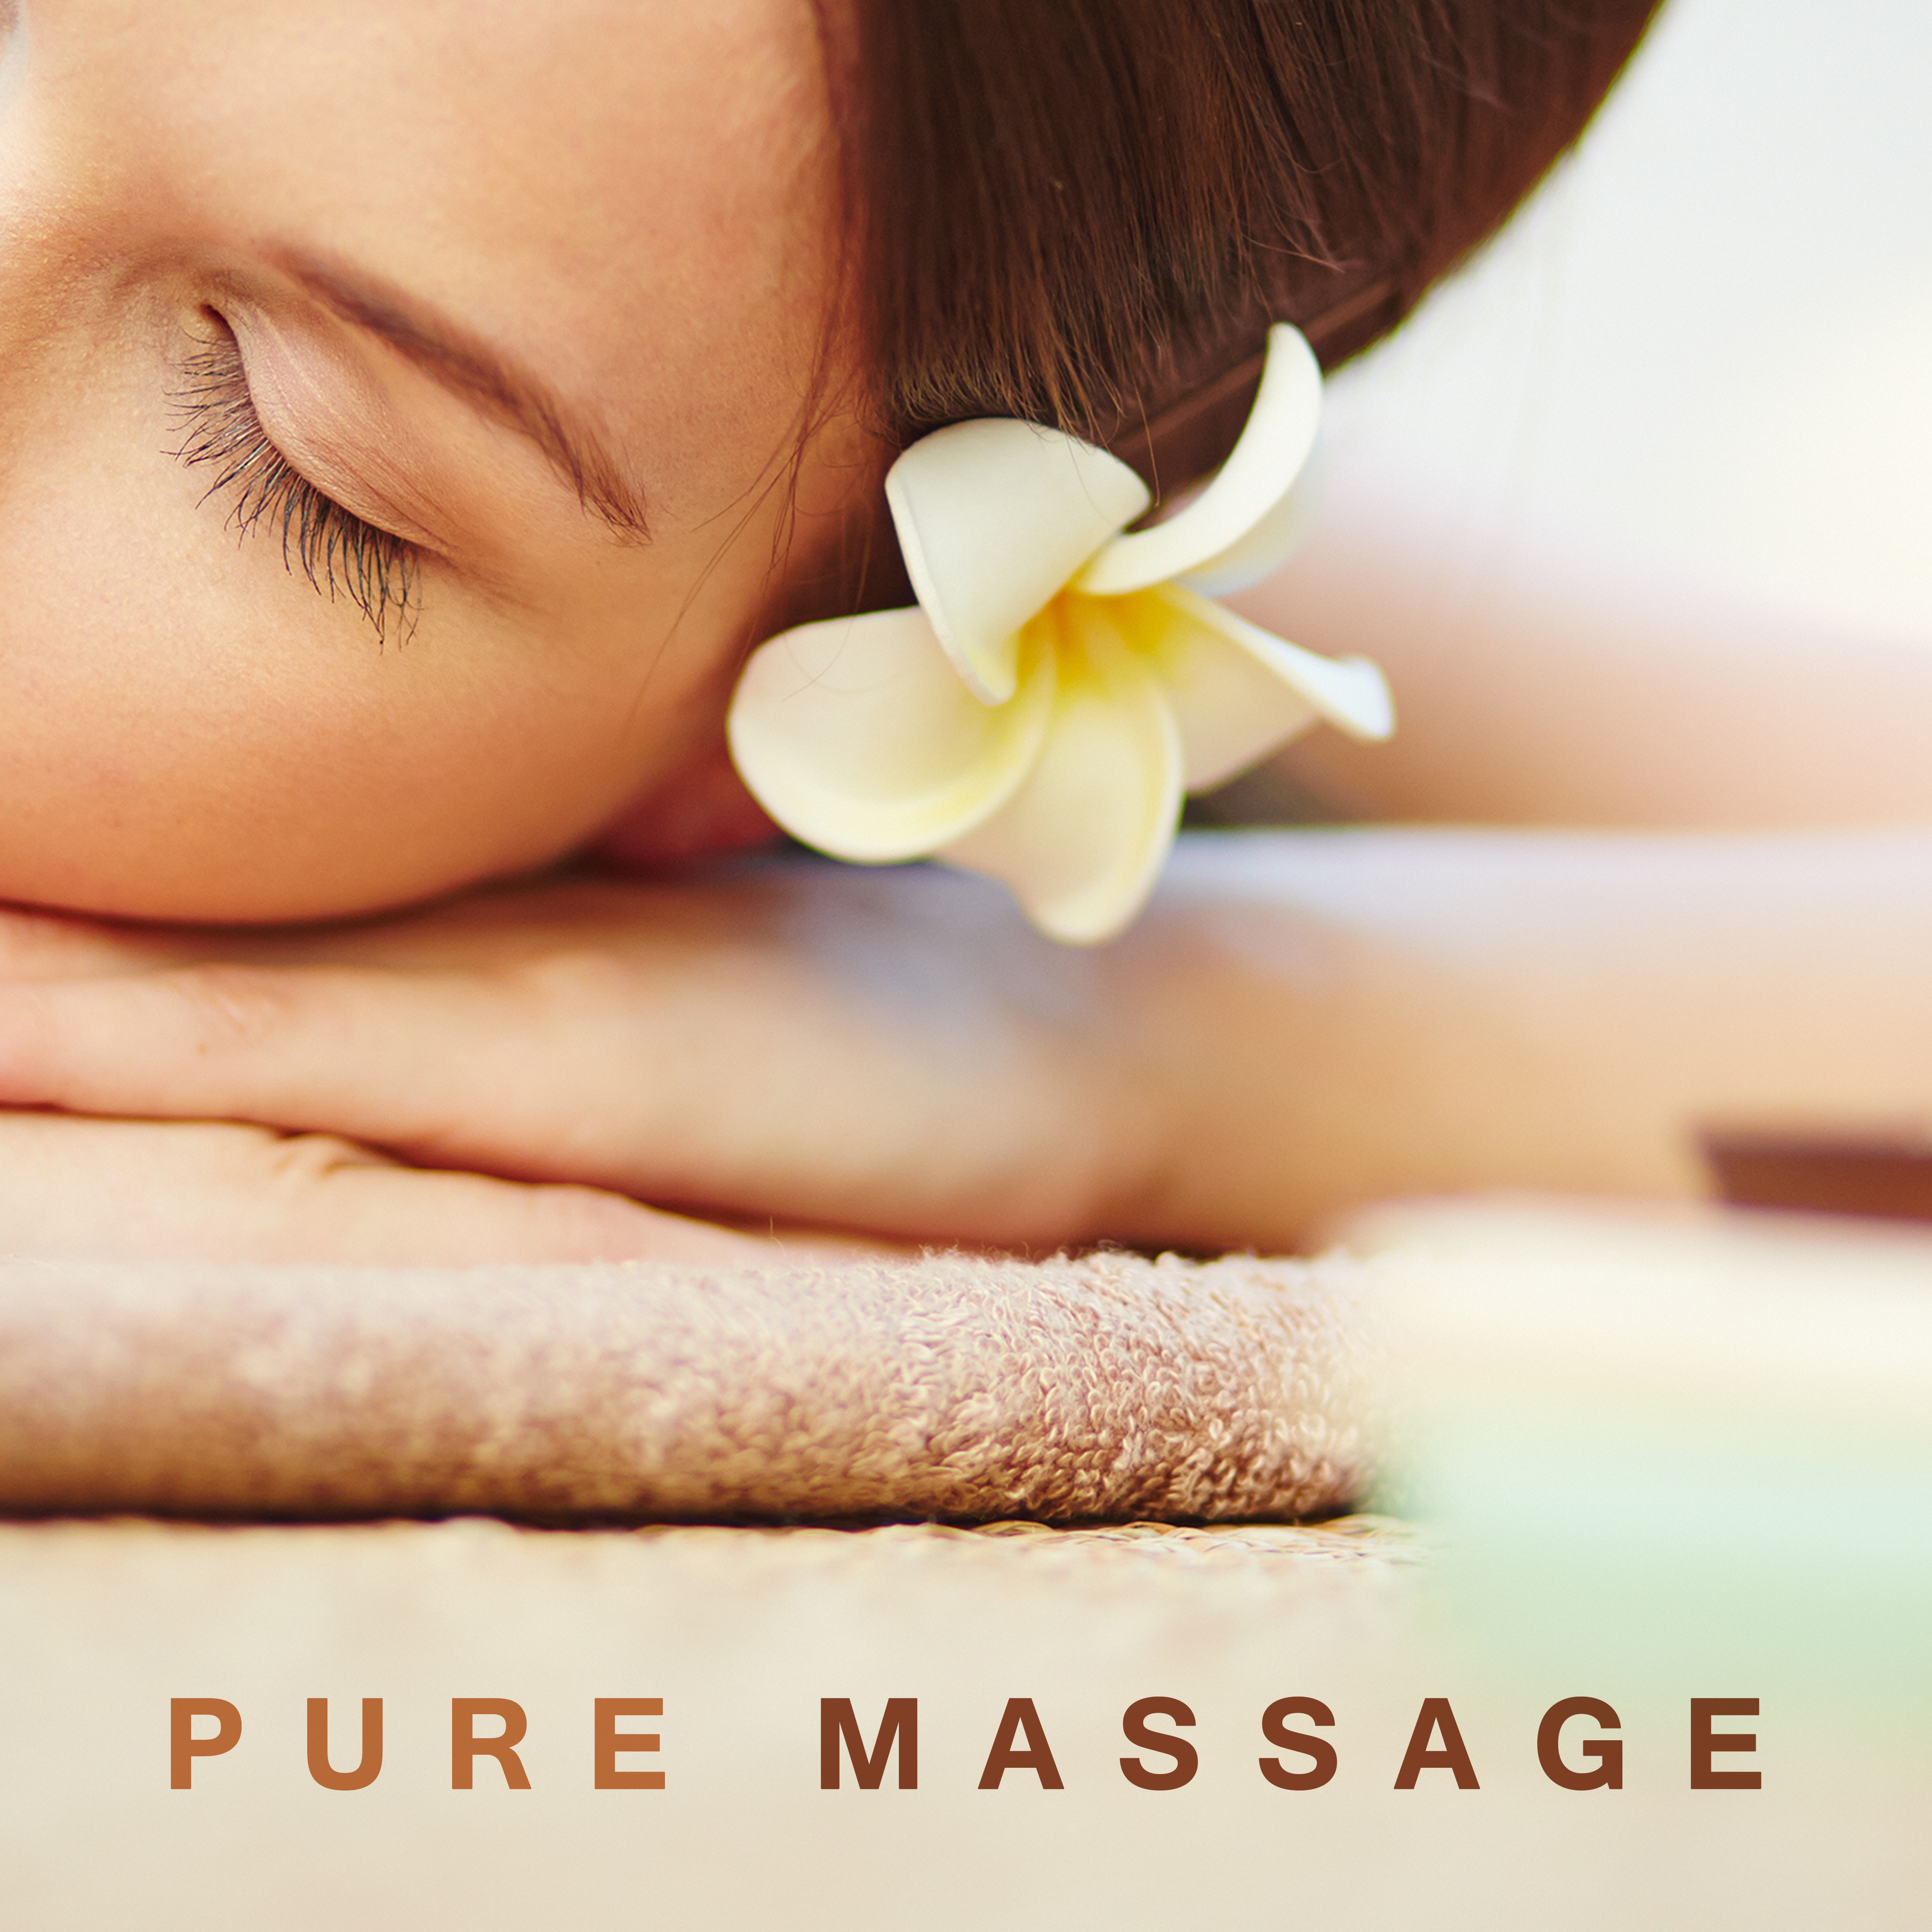 Pure Massage – New Age Sounds, Music for Massage, Spa, Wellness, Relaxation, Natural Melodies, Zen, Rest